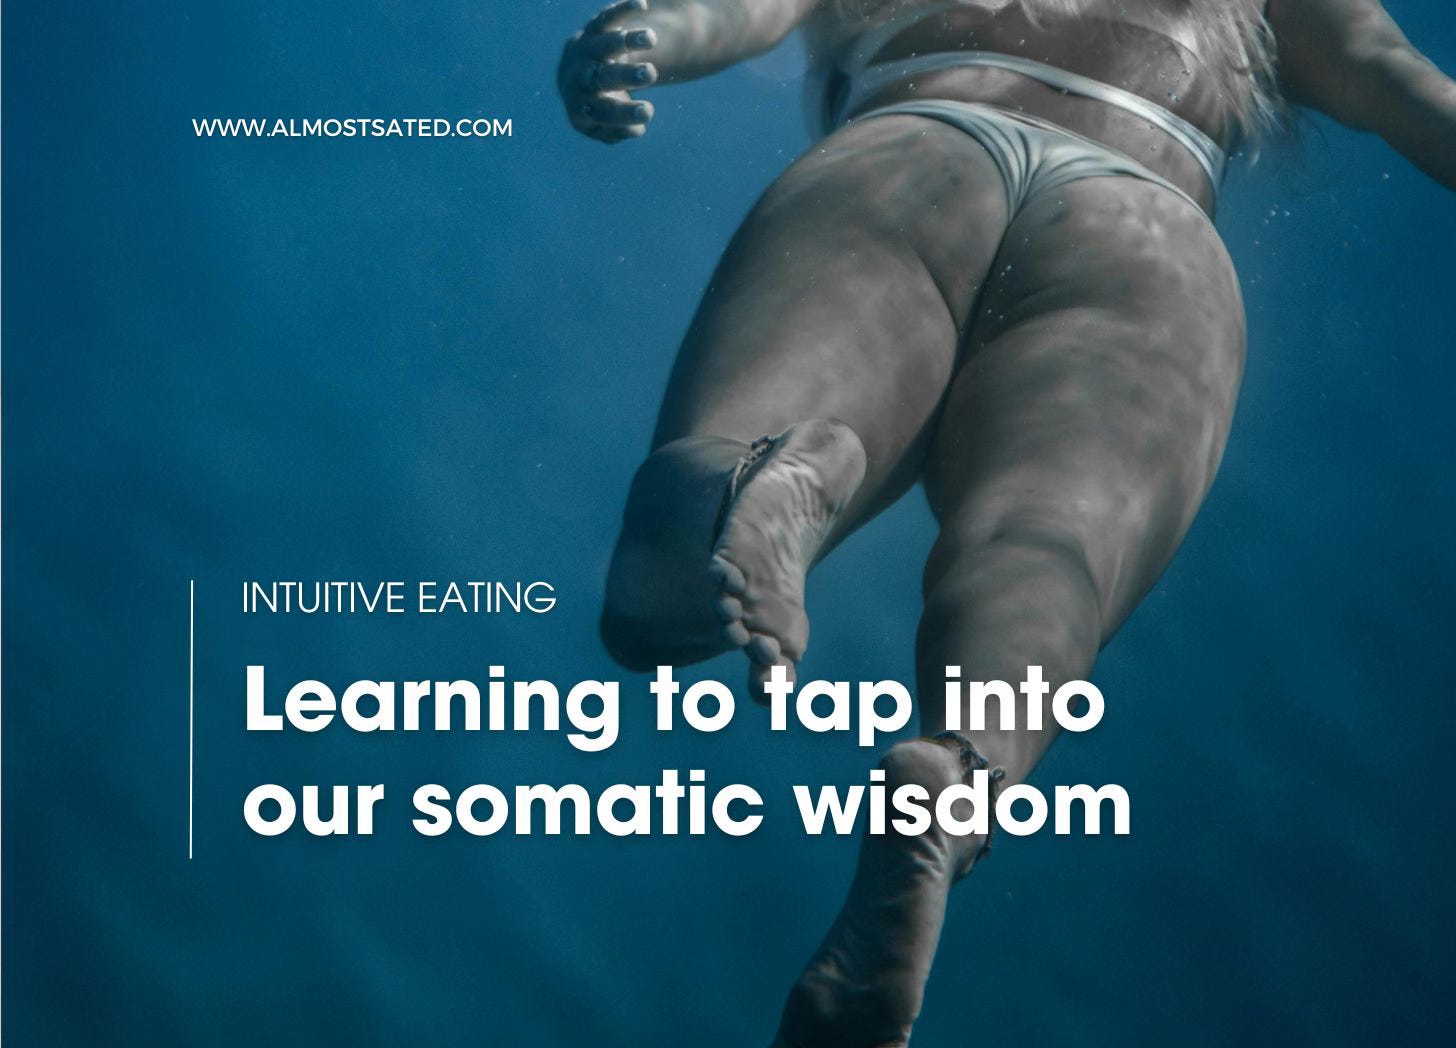 Learning to tap into our somatic wisdom